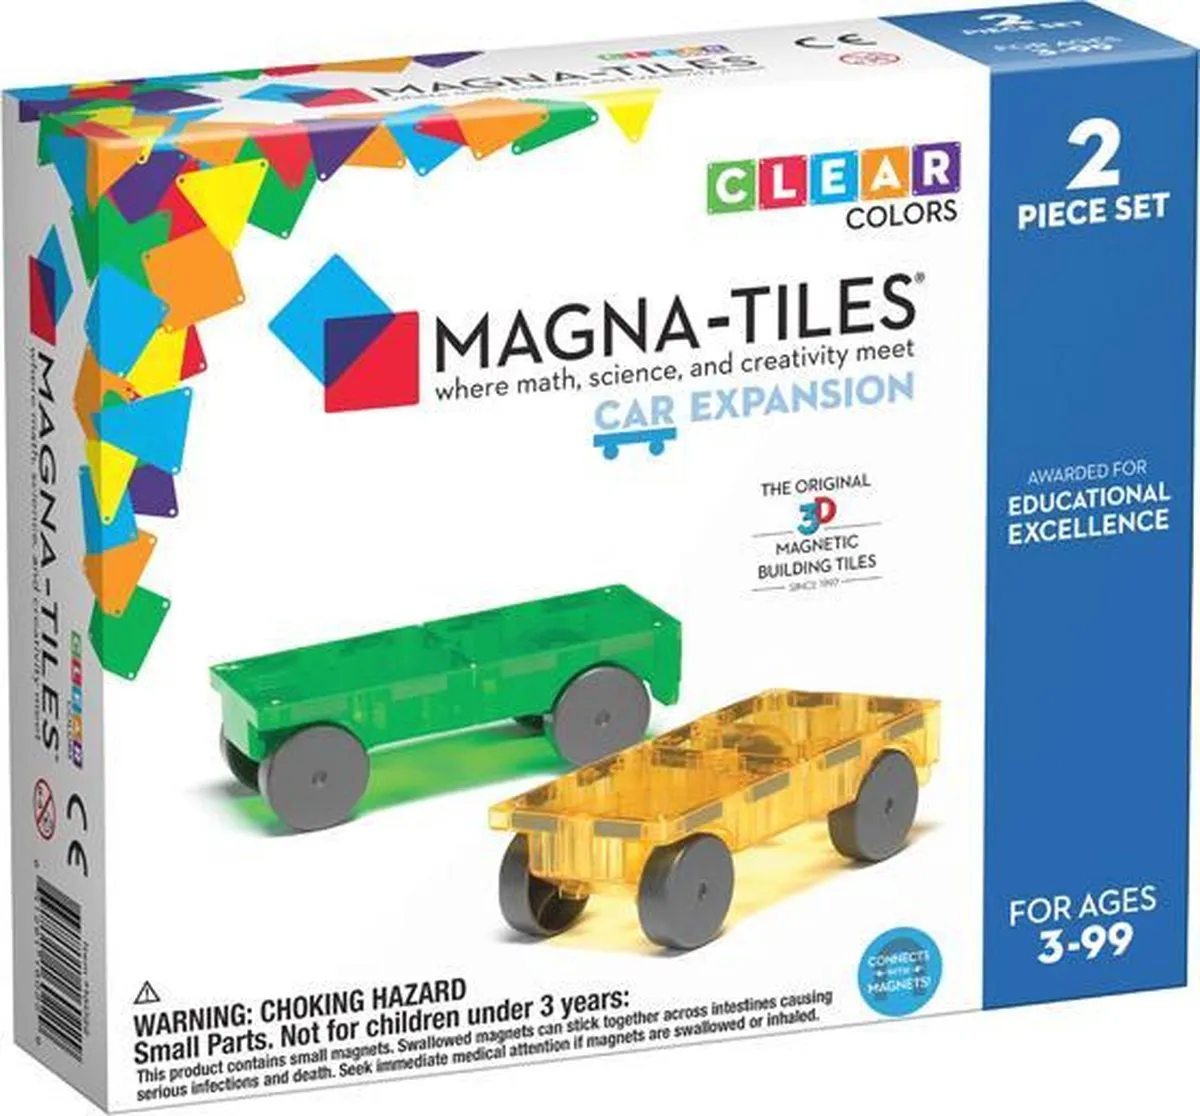 Magna-Tiles® Clear Colors Cars Expansion Set speelgoed